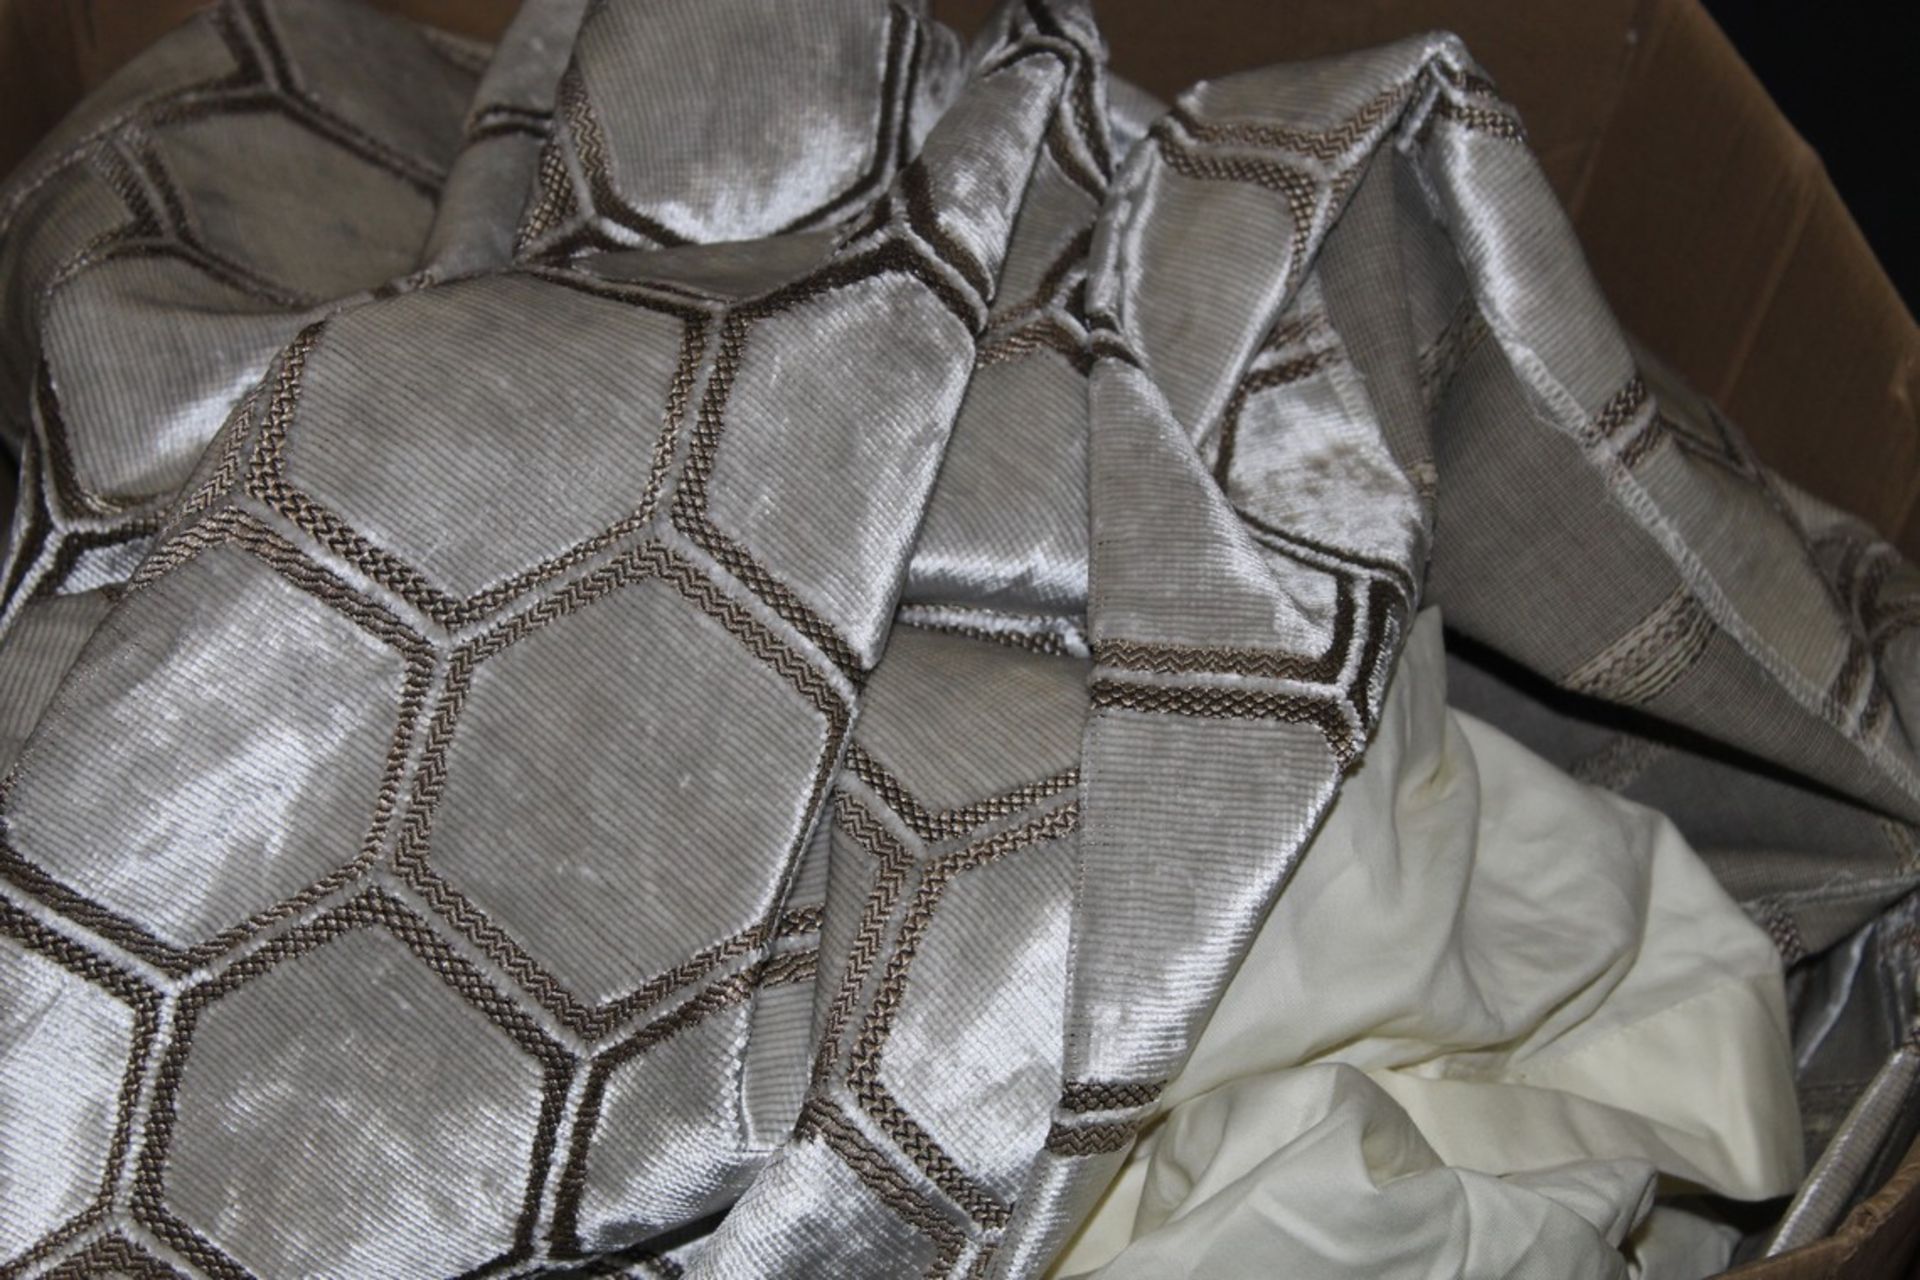 Boxed Pair of Hotel Superior Quality Multi Tab Headed Hexagonal Print Curtains RRP £2,000 (